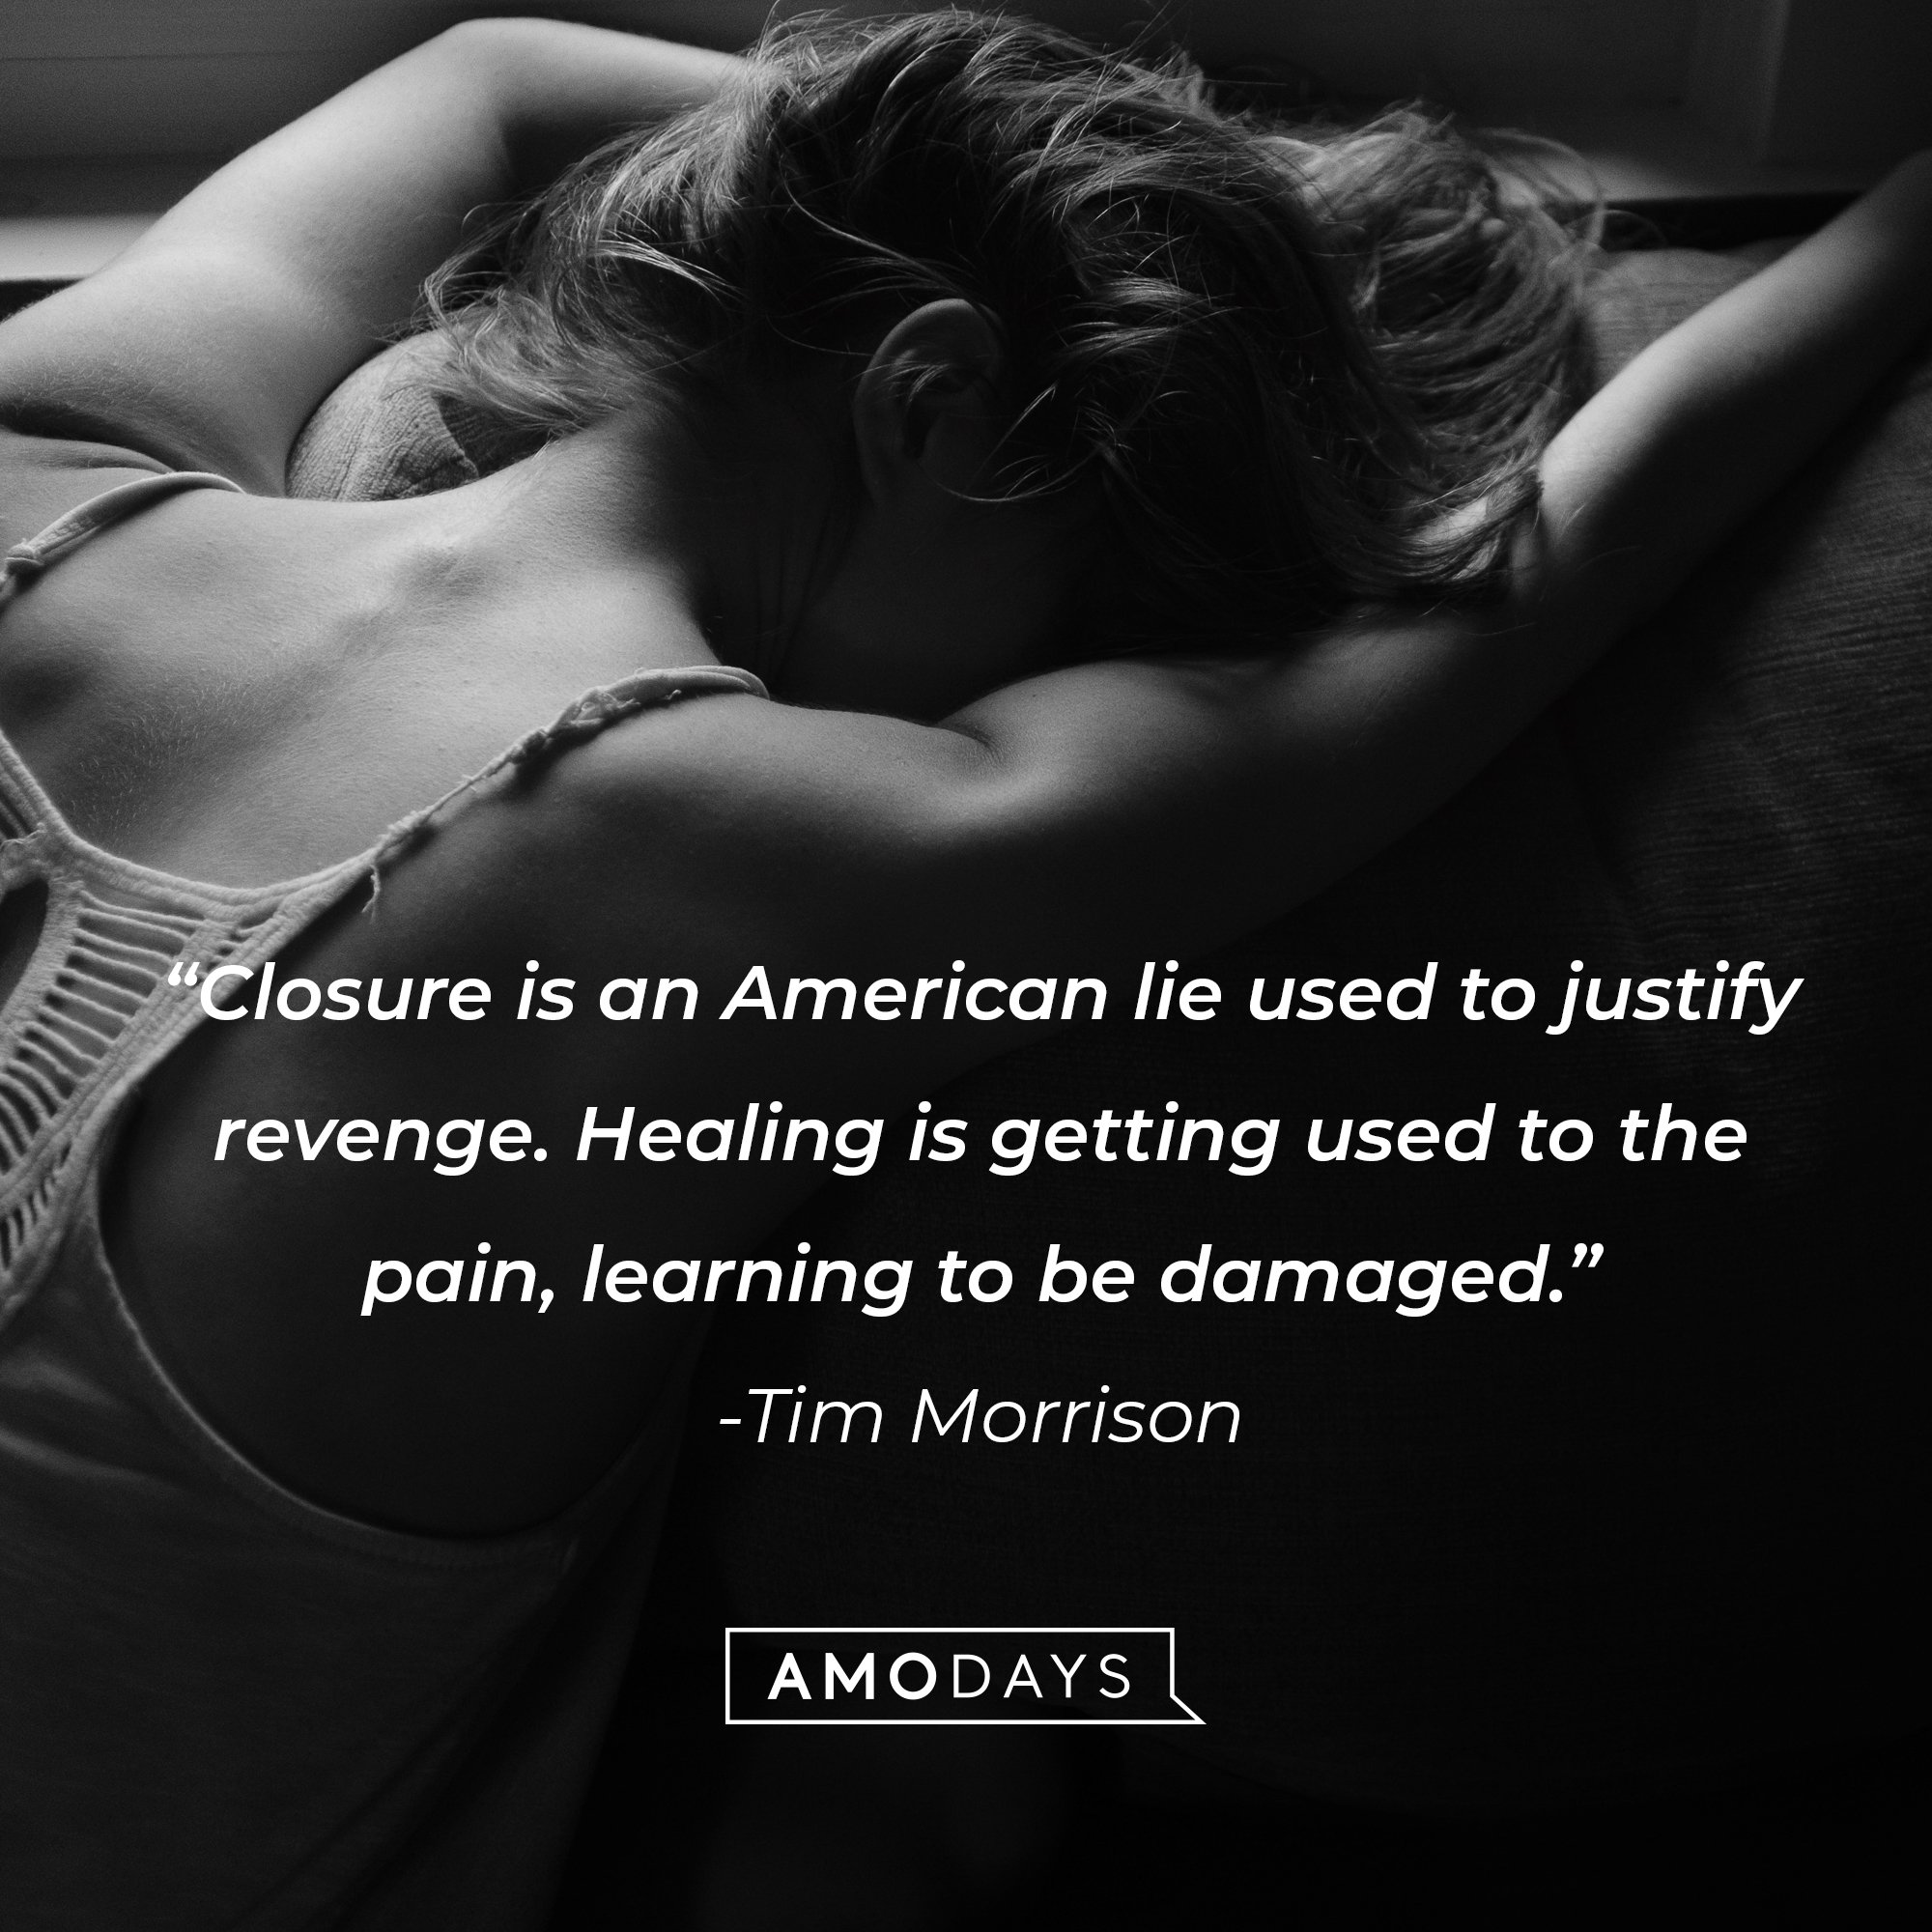 Tim Morrison's quote: "Closure is an American lie used to justify revenge. Healing is getting used to the pain, learning to be damaged." | Image: AmoDays